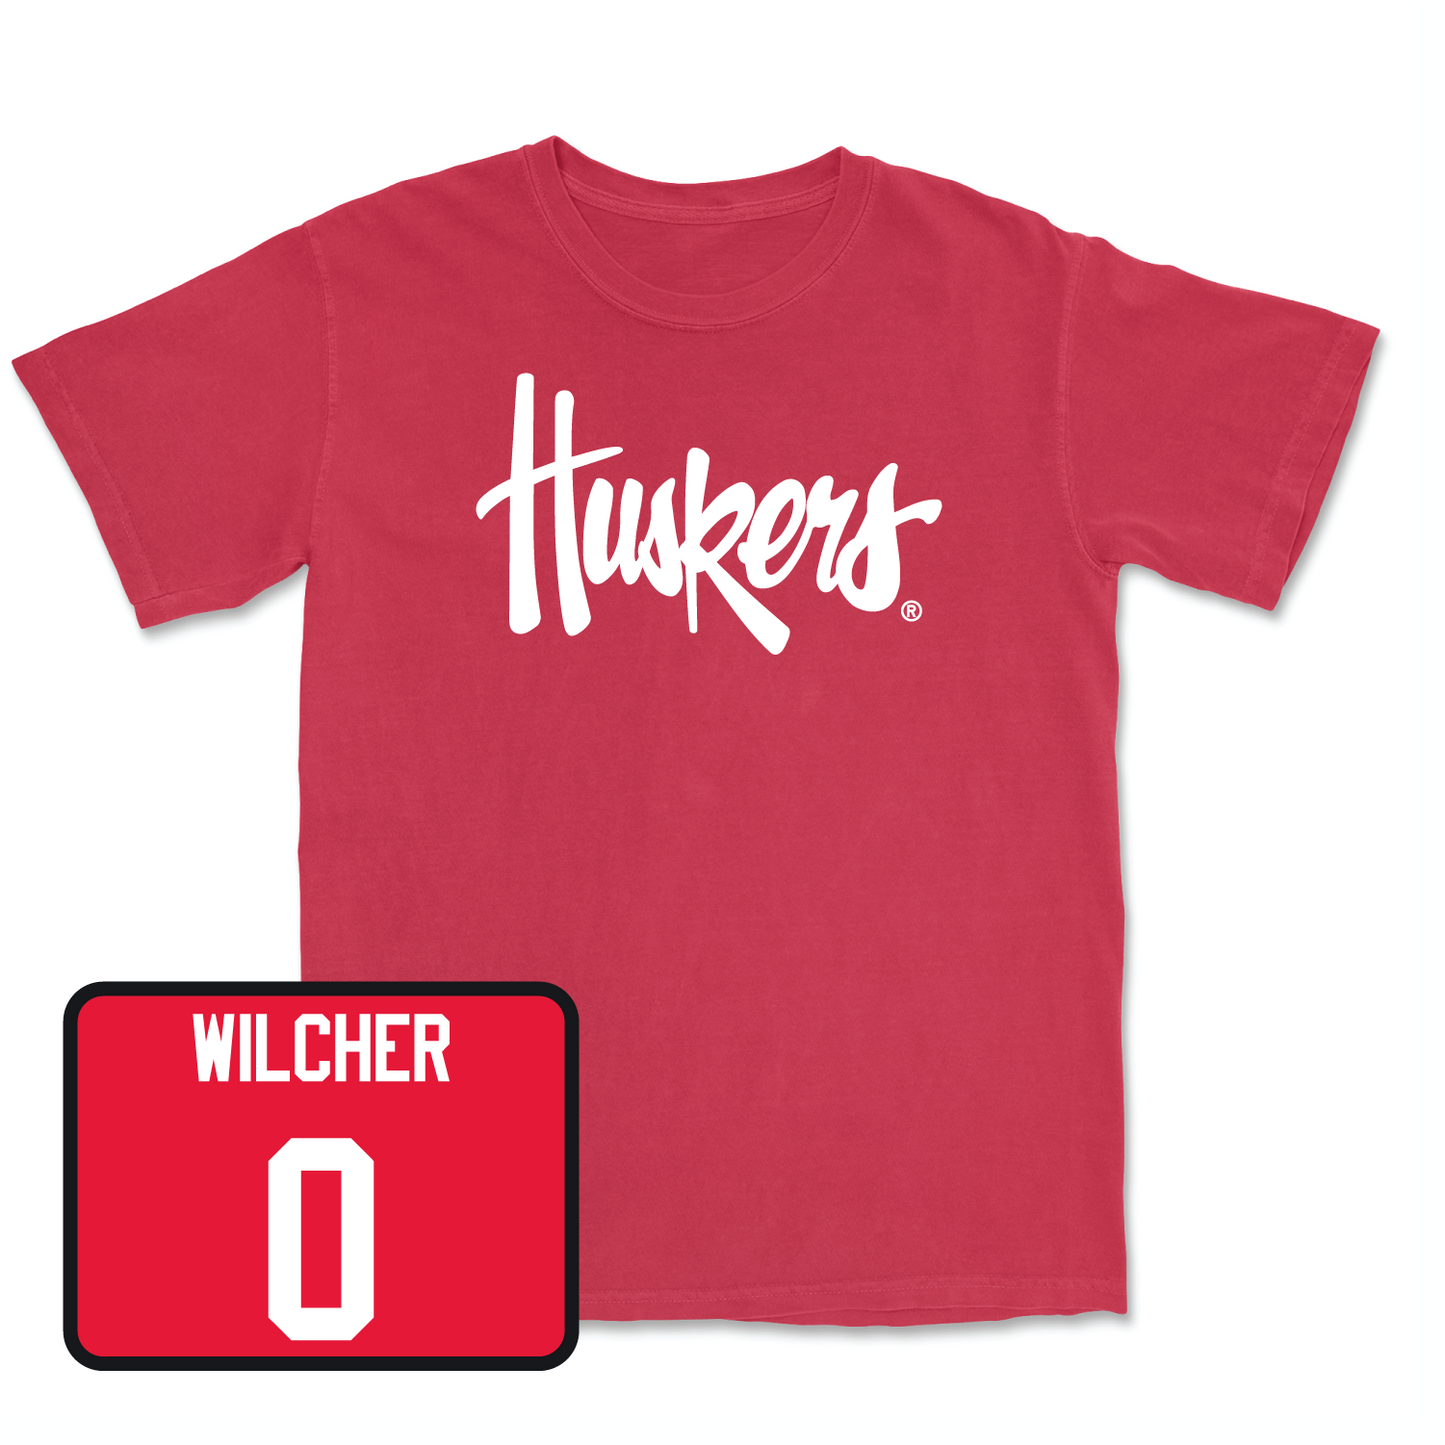 Red Men's Basketball Huskers Tee Small / C.J. Wilcher | #0